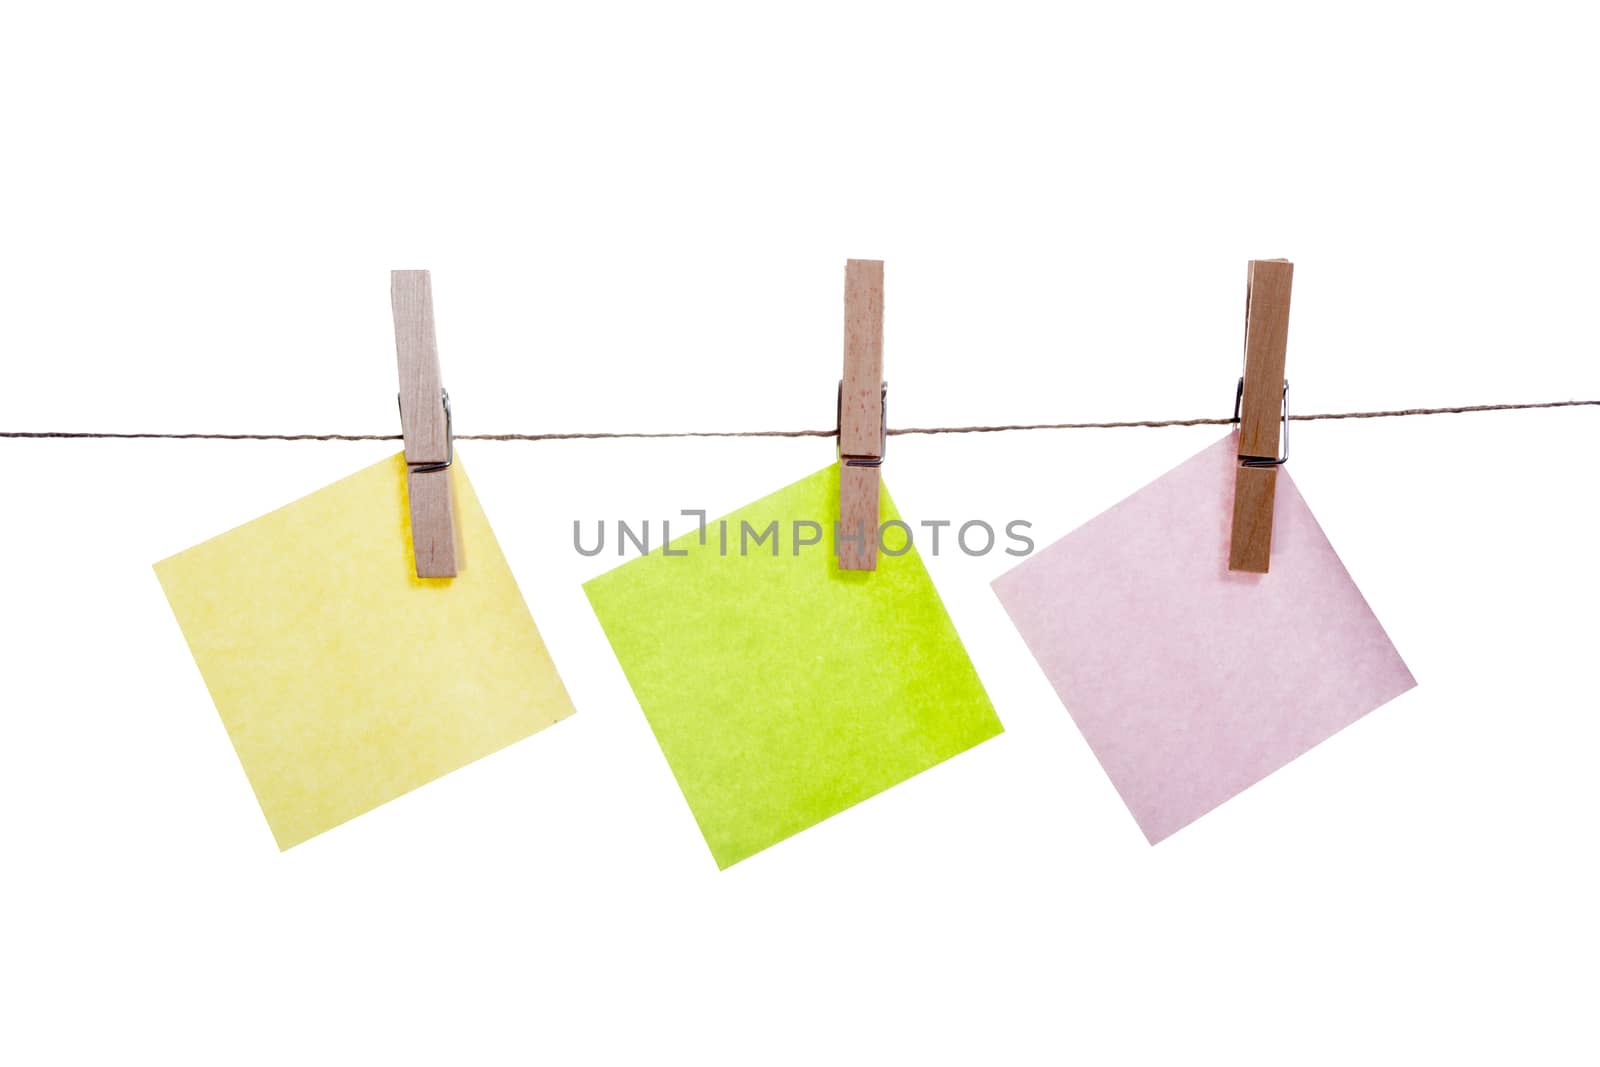 Blank paper cards hanging on clothespins